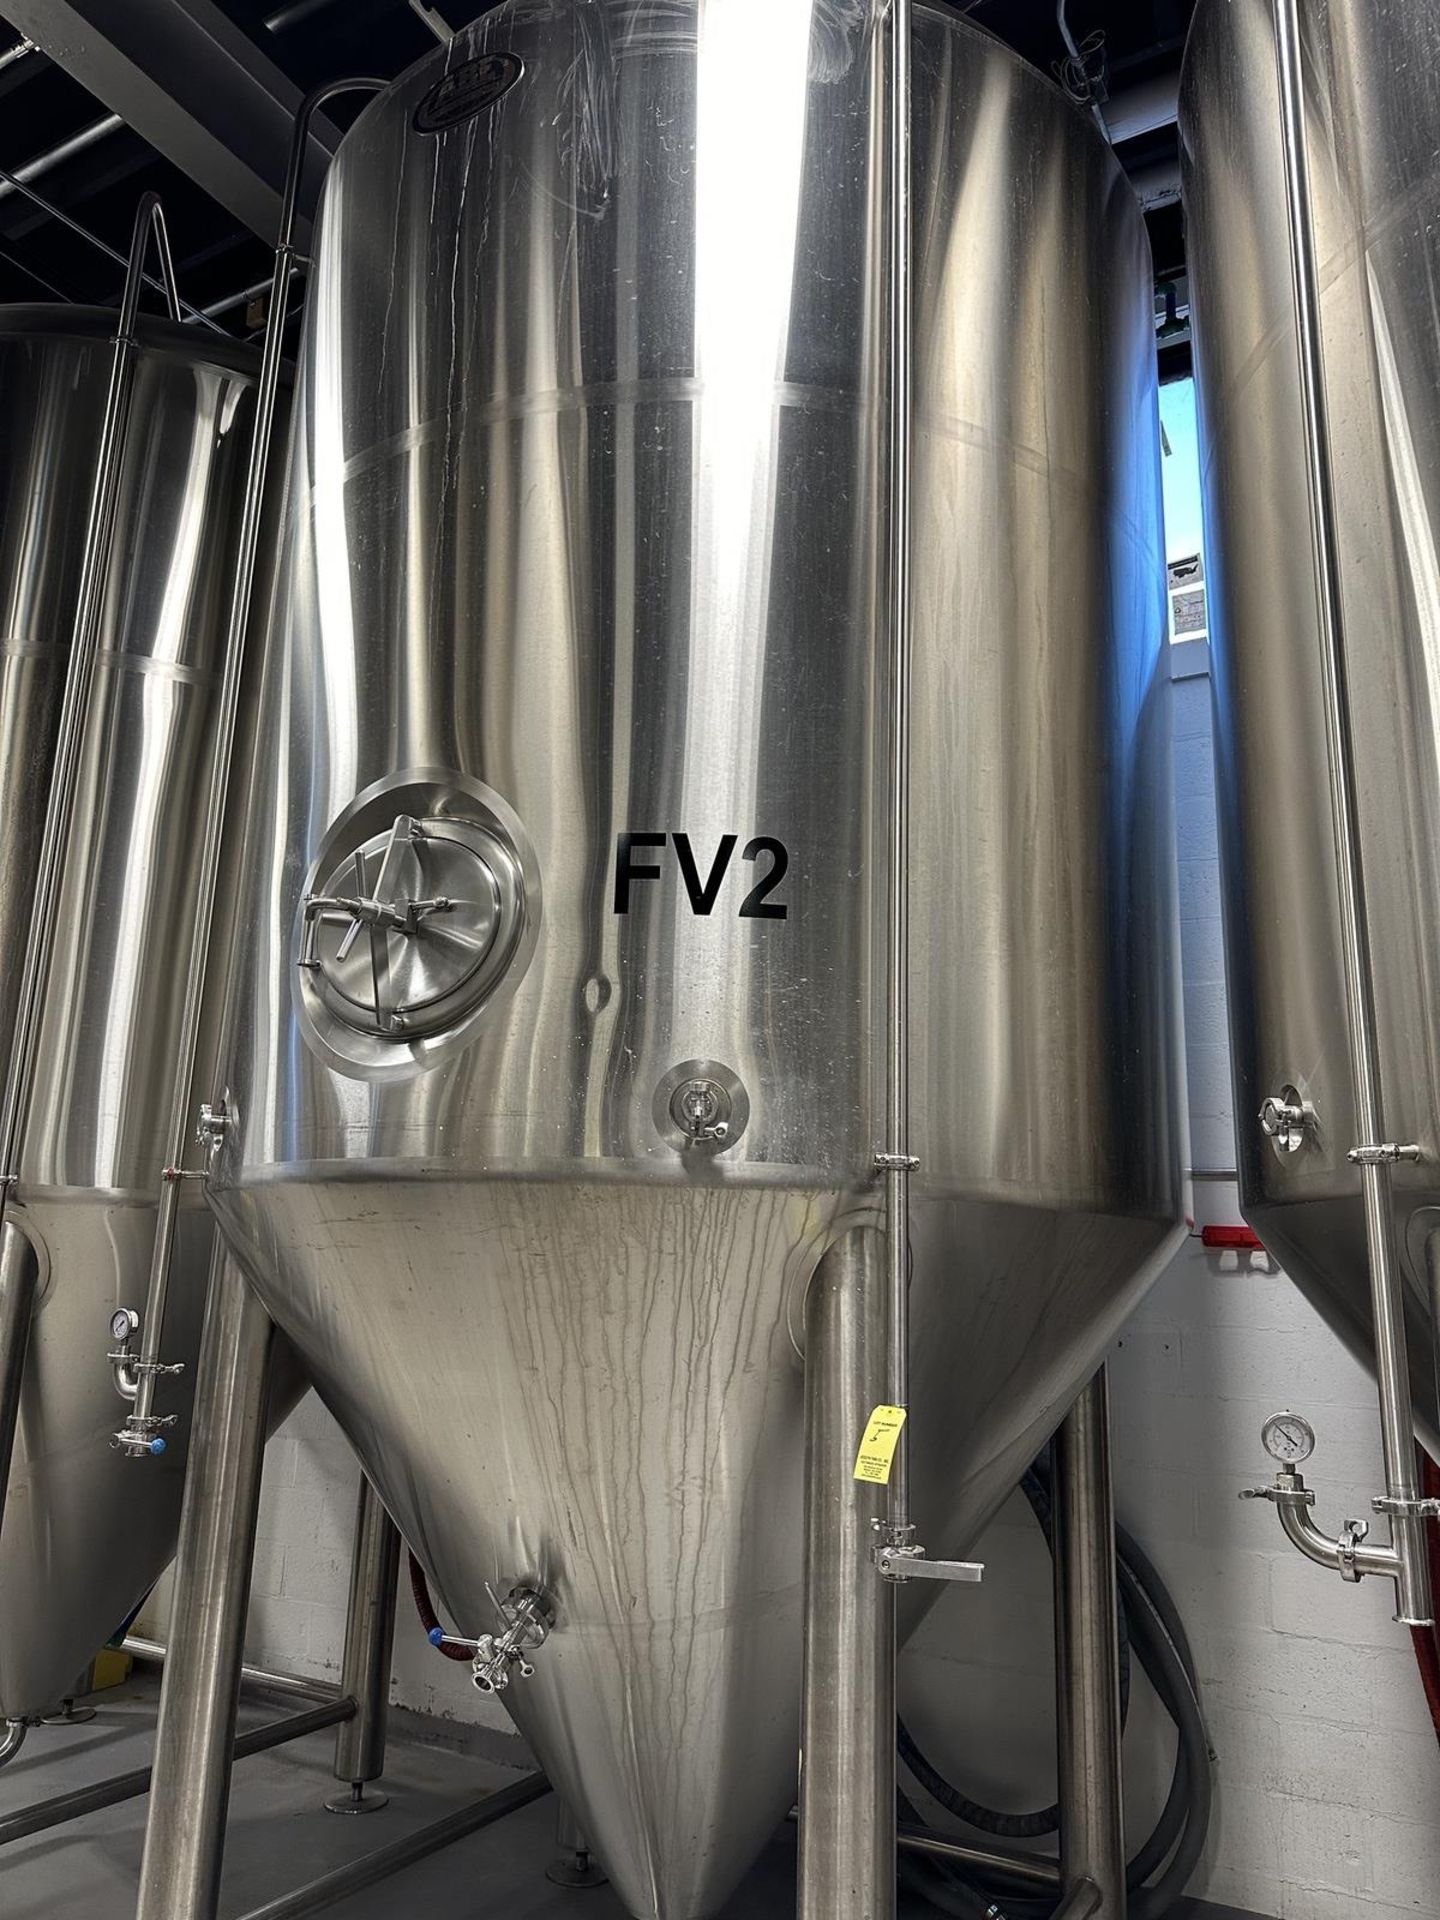 2016 ABE 90 BBL Jacketed Fermenter (FV 2), Approx. 16' H x 8' OD | Rig Fee $2600 - Image 2 of 3